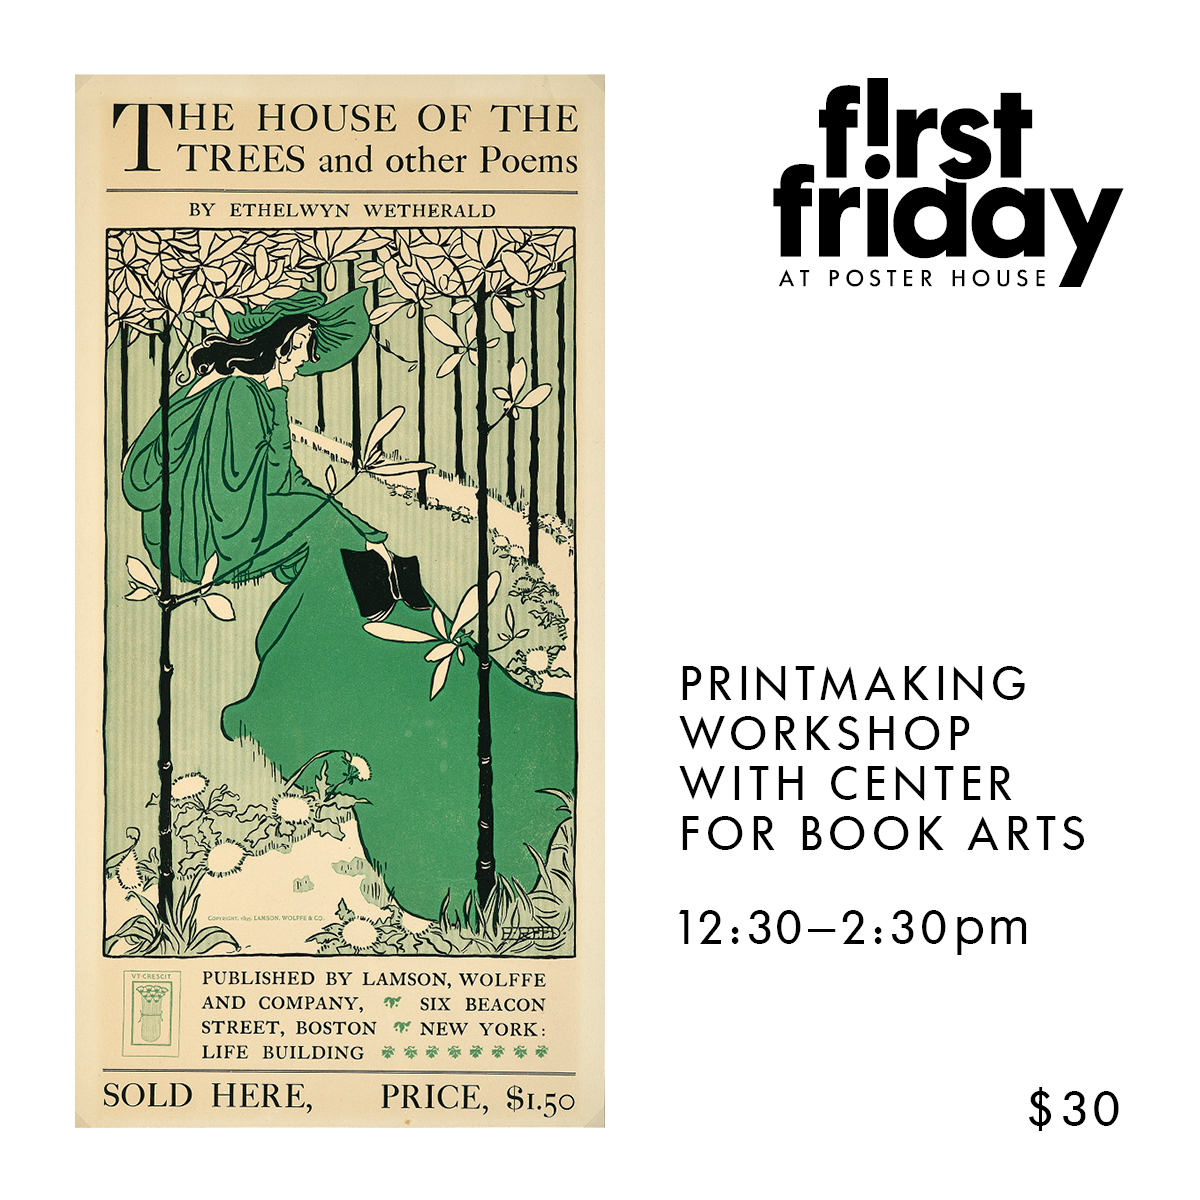 Announcement promoting First Friday featuring a poster of an elegantly dressed woman in green, contemplating under a tree with an opened book. Text reads First Friday at Poster House Printmaking Workshop with Center for Book Arts 12:30 to 2:30pm $30.